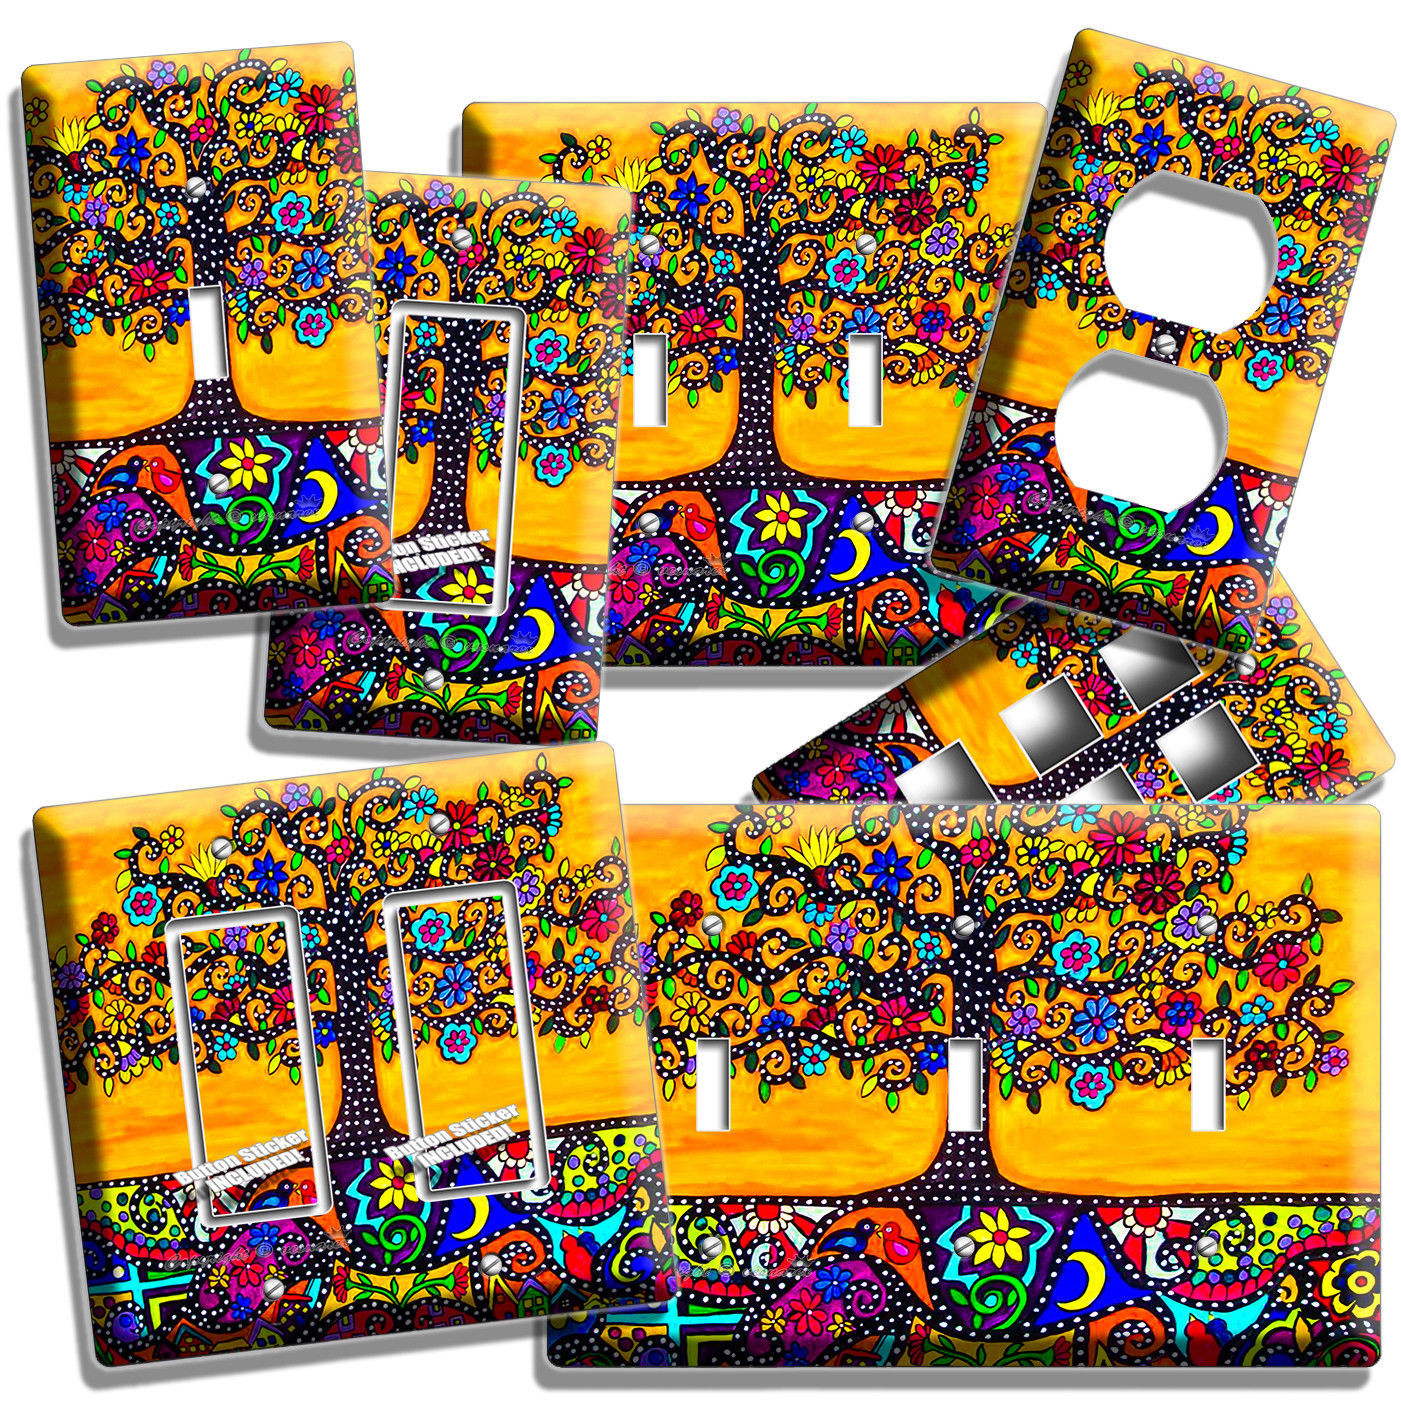 MEXICAN TREE OF LIFE FOLK ART LIGHT SWITCH OUTLET WALL PLATE ROOM HOUSE HD DECOR